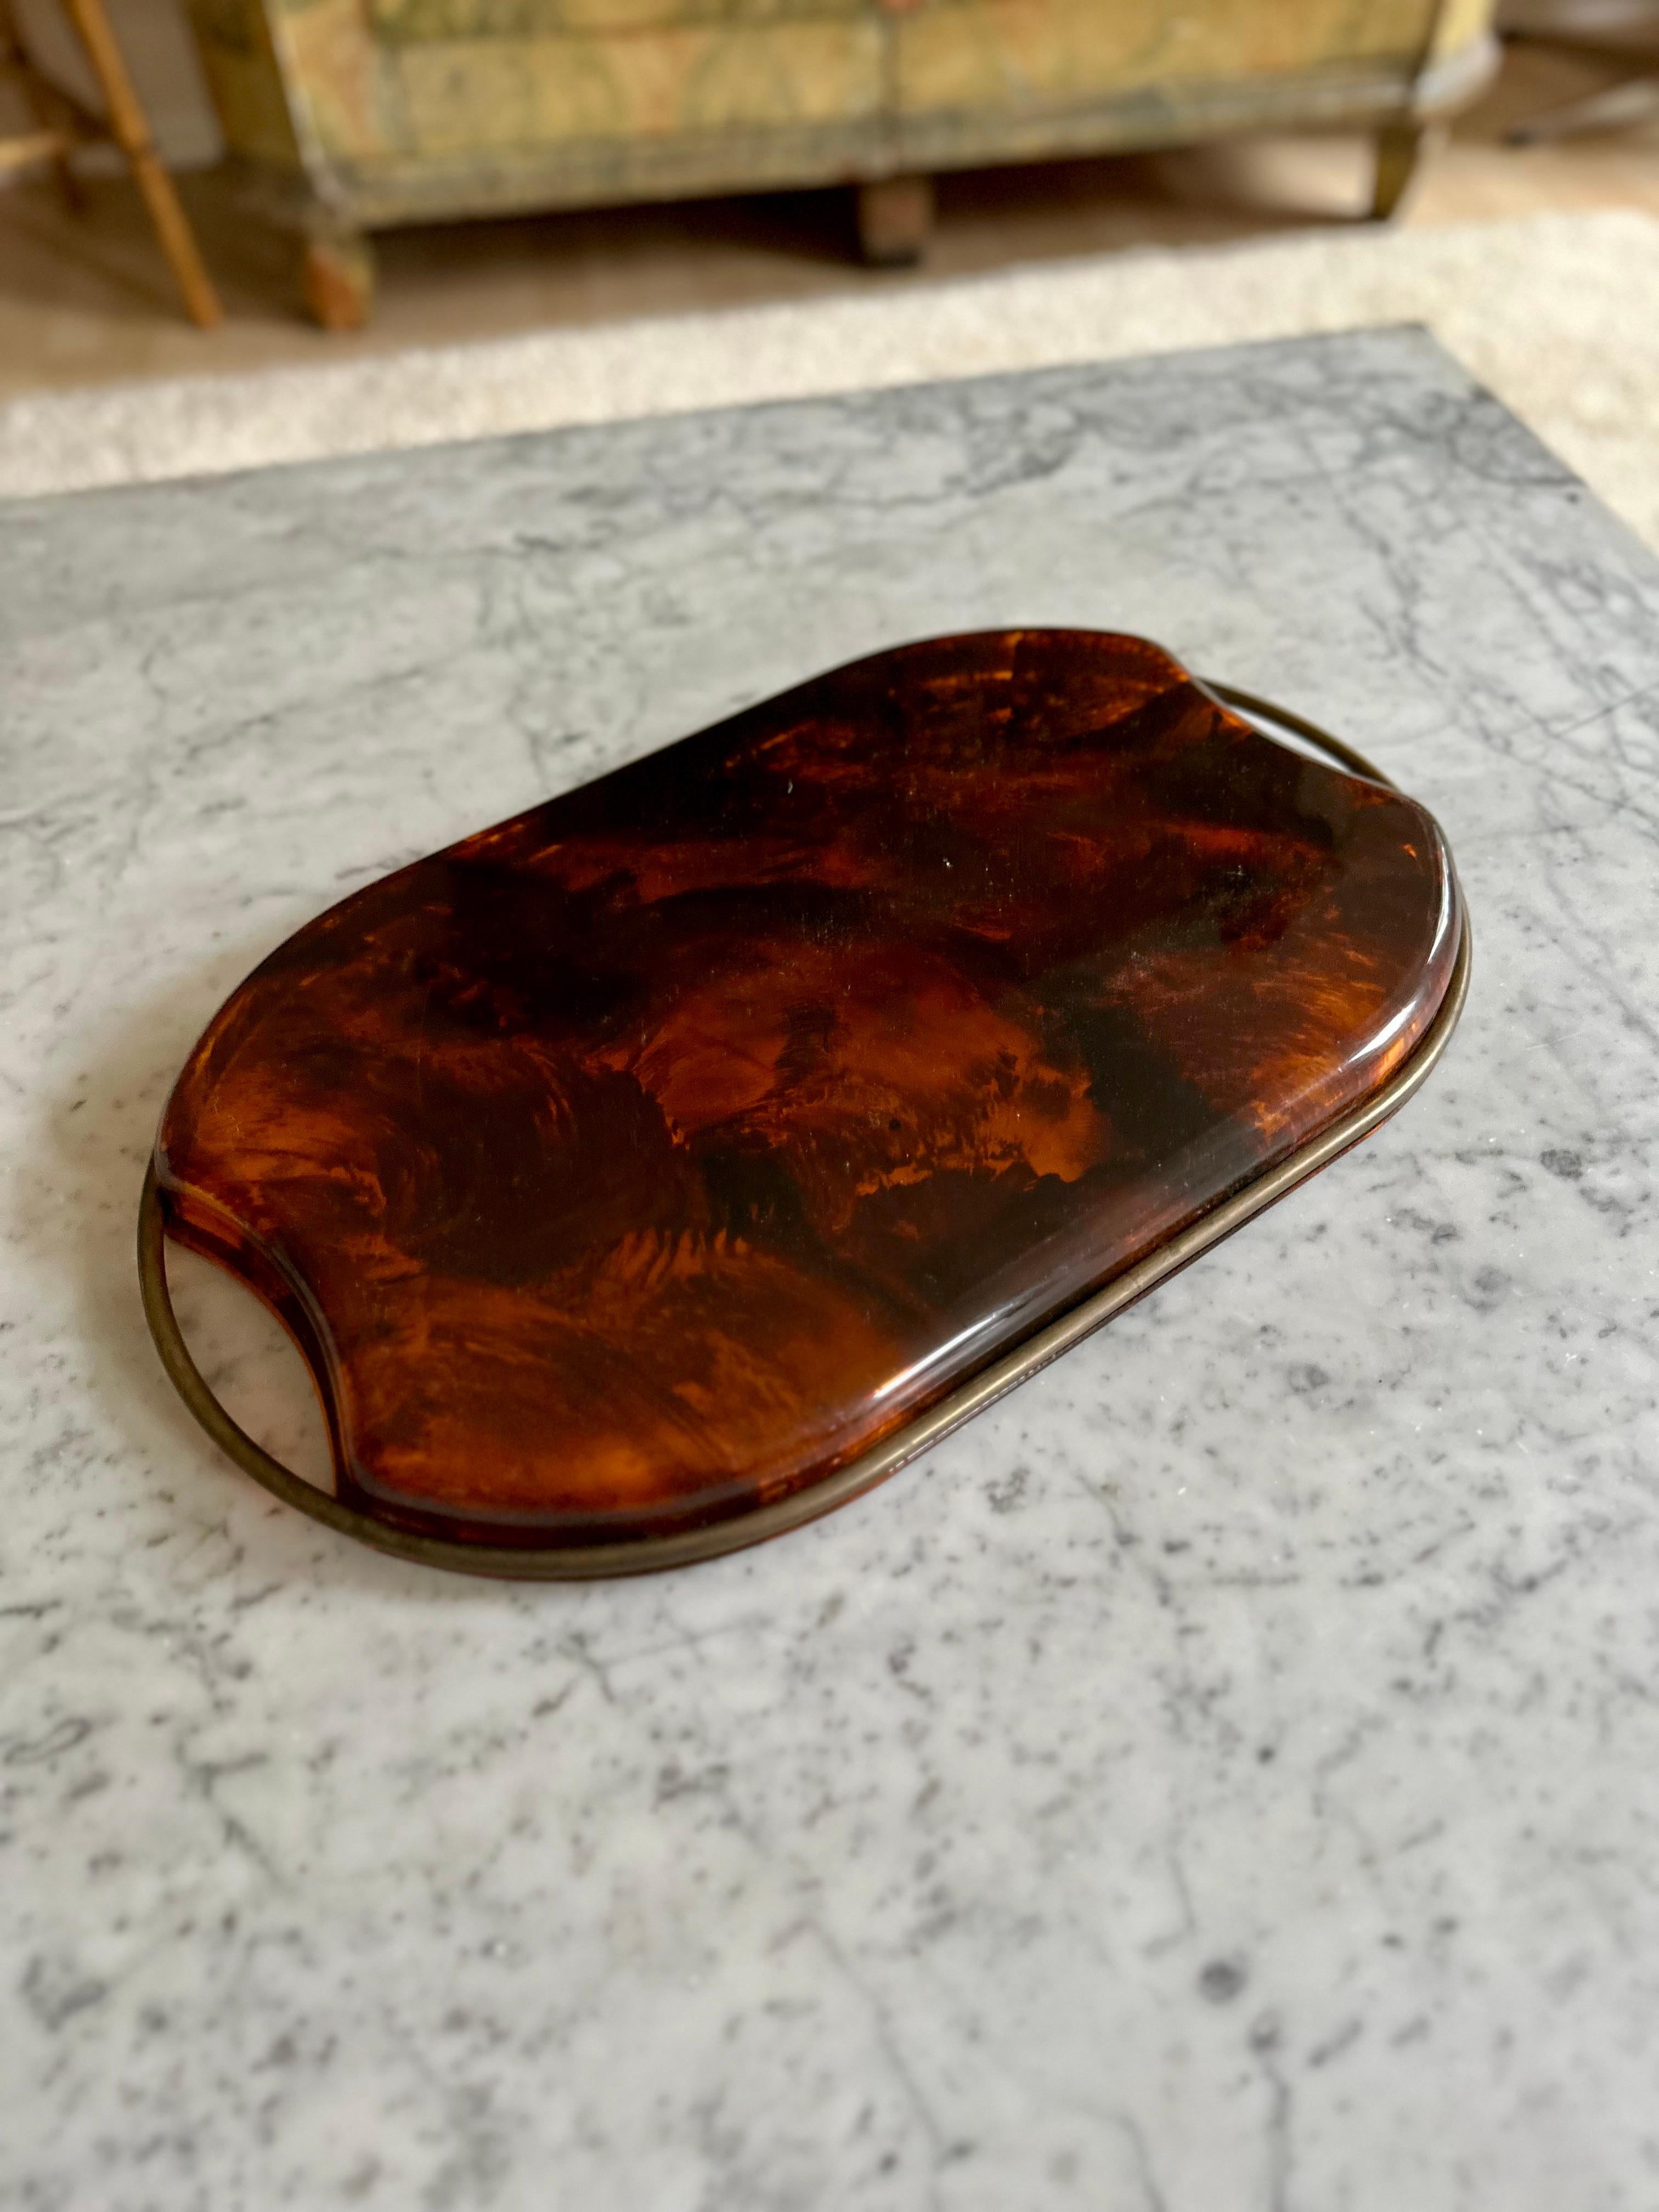  Guzzini’s Oval Lucite Serving Tray from 1970s Italy – Faux Tortoiseshell -brass For Sale 5